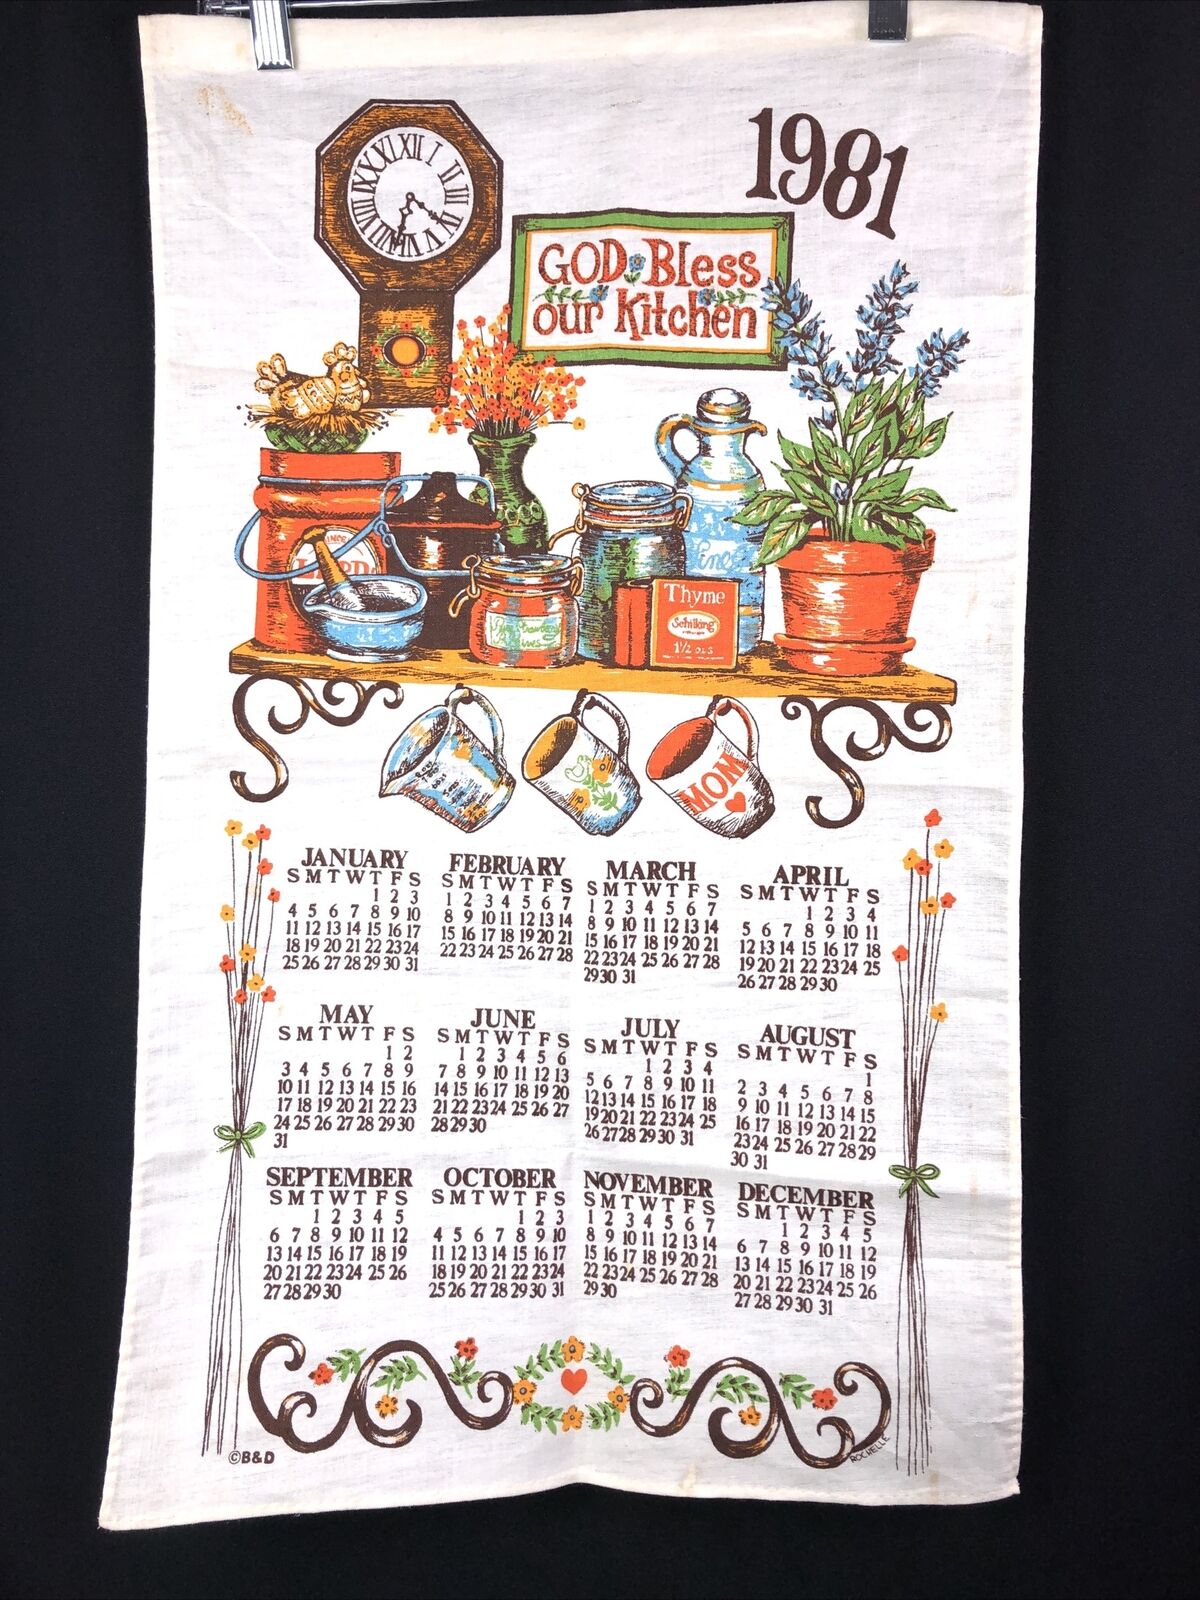 Vintage Cloth Fabric Calendar Tea Towel 1981 God Bless Our Kitchen B&D Stained